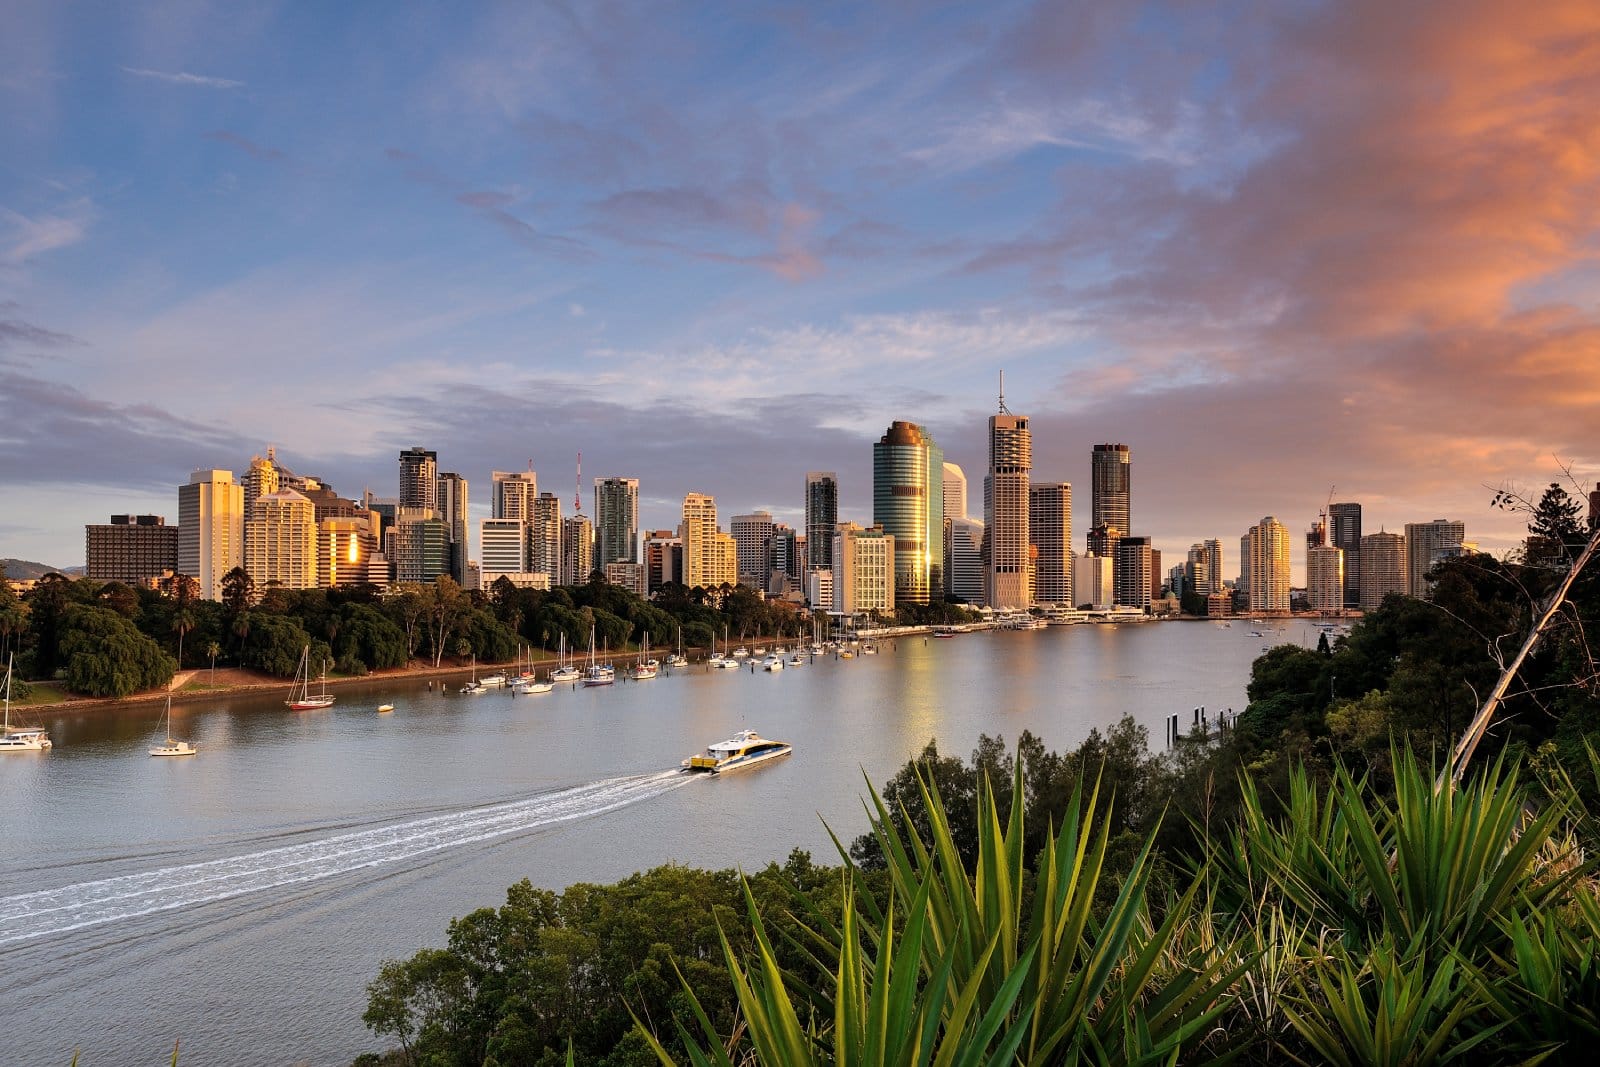 Image Credit: Shutterstock / Maythee Voran <p>Enjoy Brisbane’s subtropical climate, with days spent lounging on sandy beaches, exploring rainforests in nearby national parks, and dining alfresco at waterfront restaurants along the Brisbane River. Discover the city’s vibrant arts scene with visits to galleries, theaters, and music venues showcasing local talent and international acts.</p>